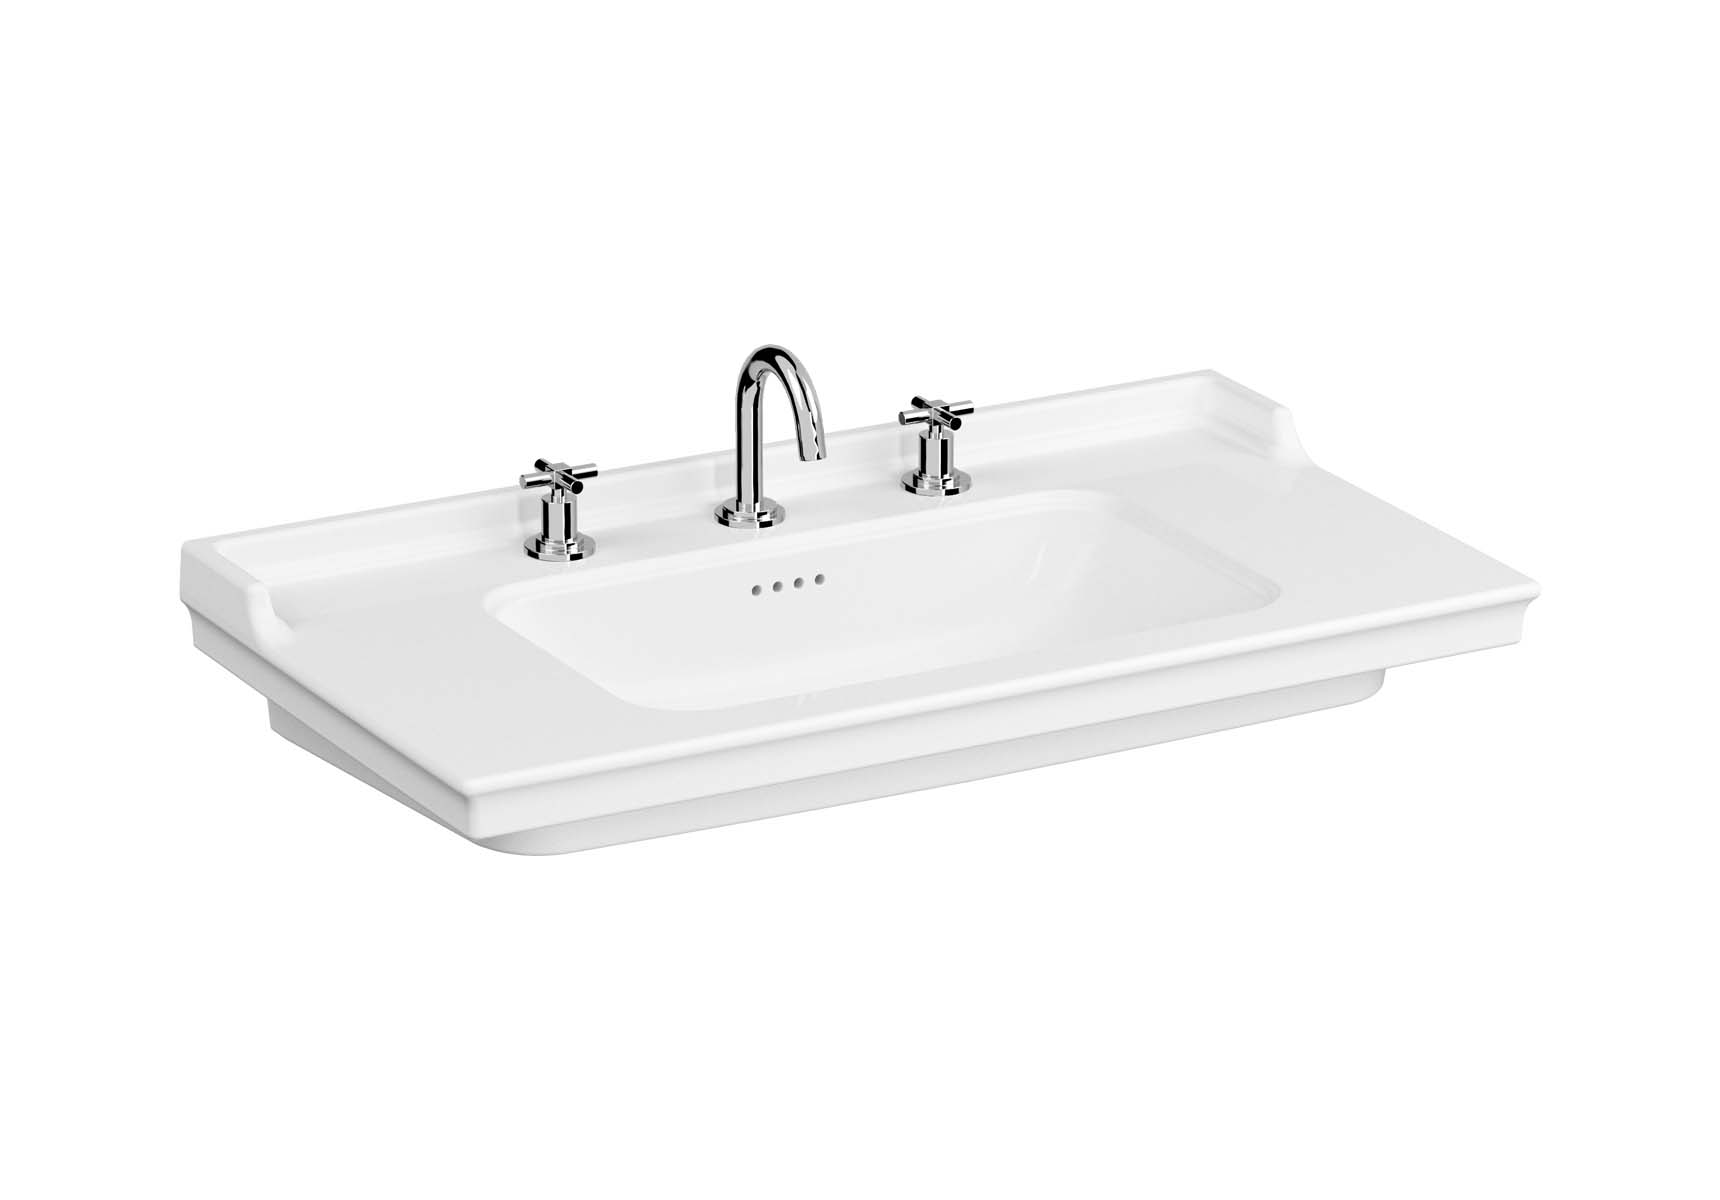 Vanity Basin, 100 cm, Three Tap Holes, With Overflow Hole, With Metallic Legs